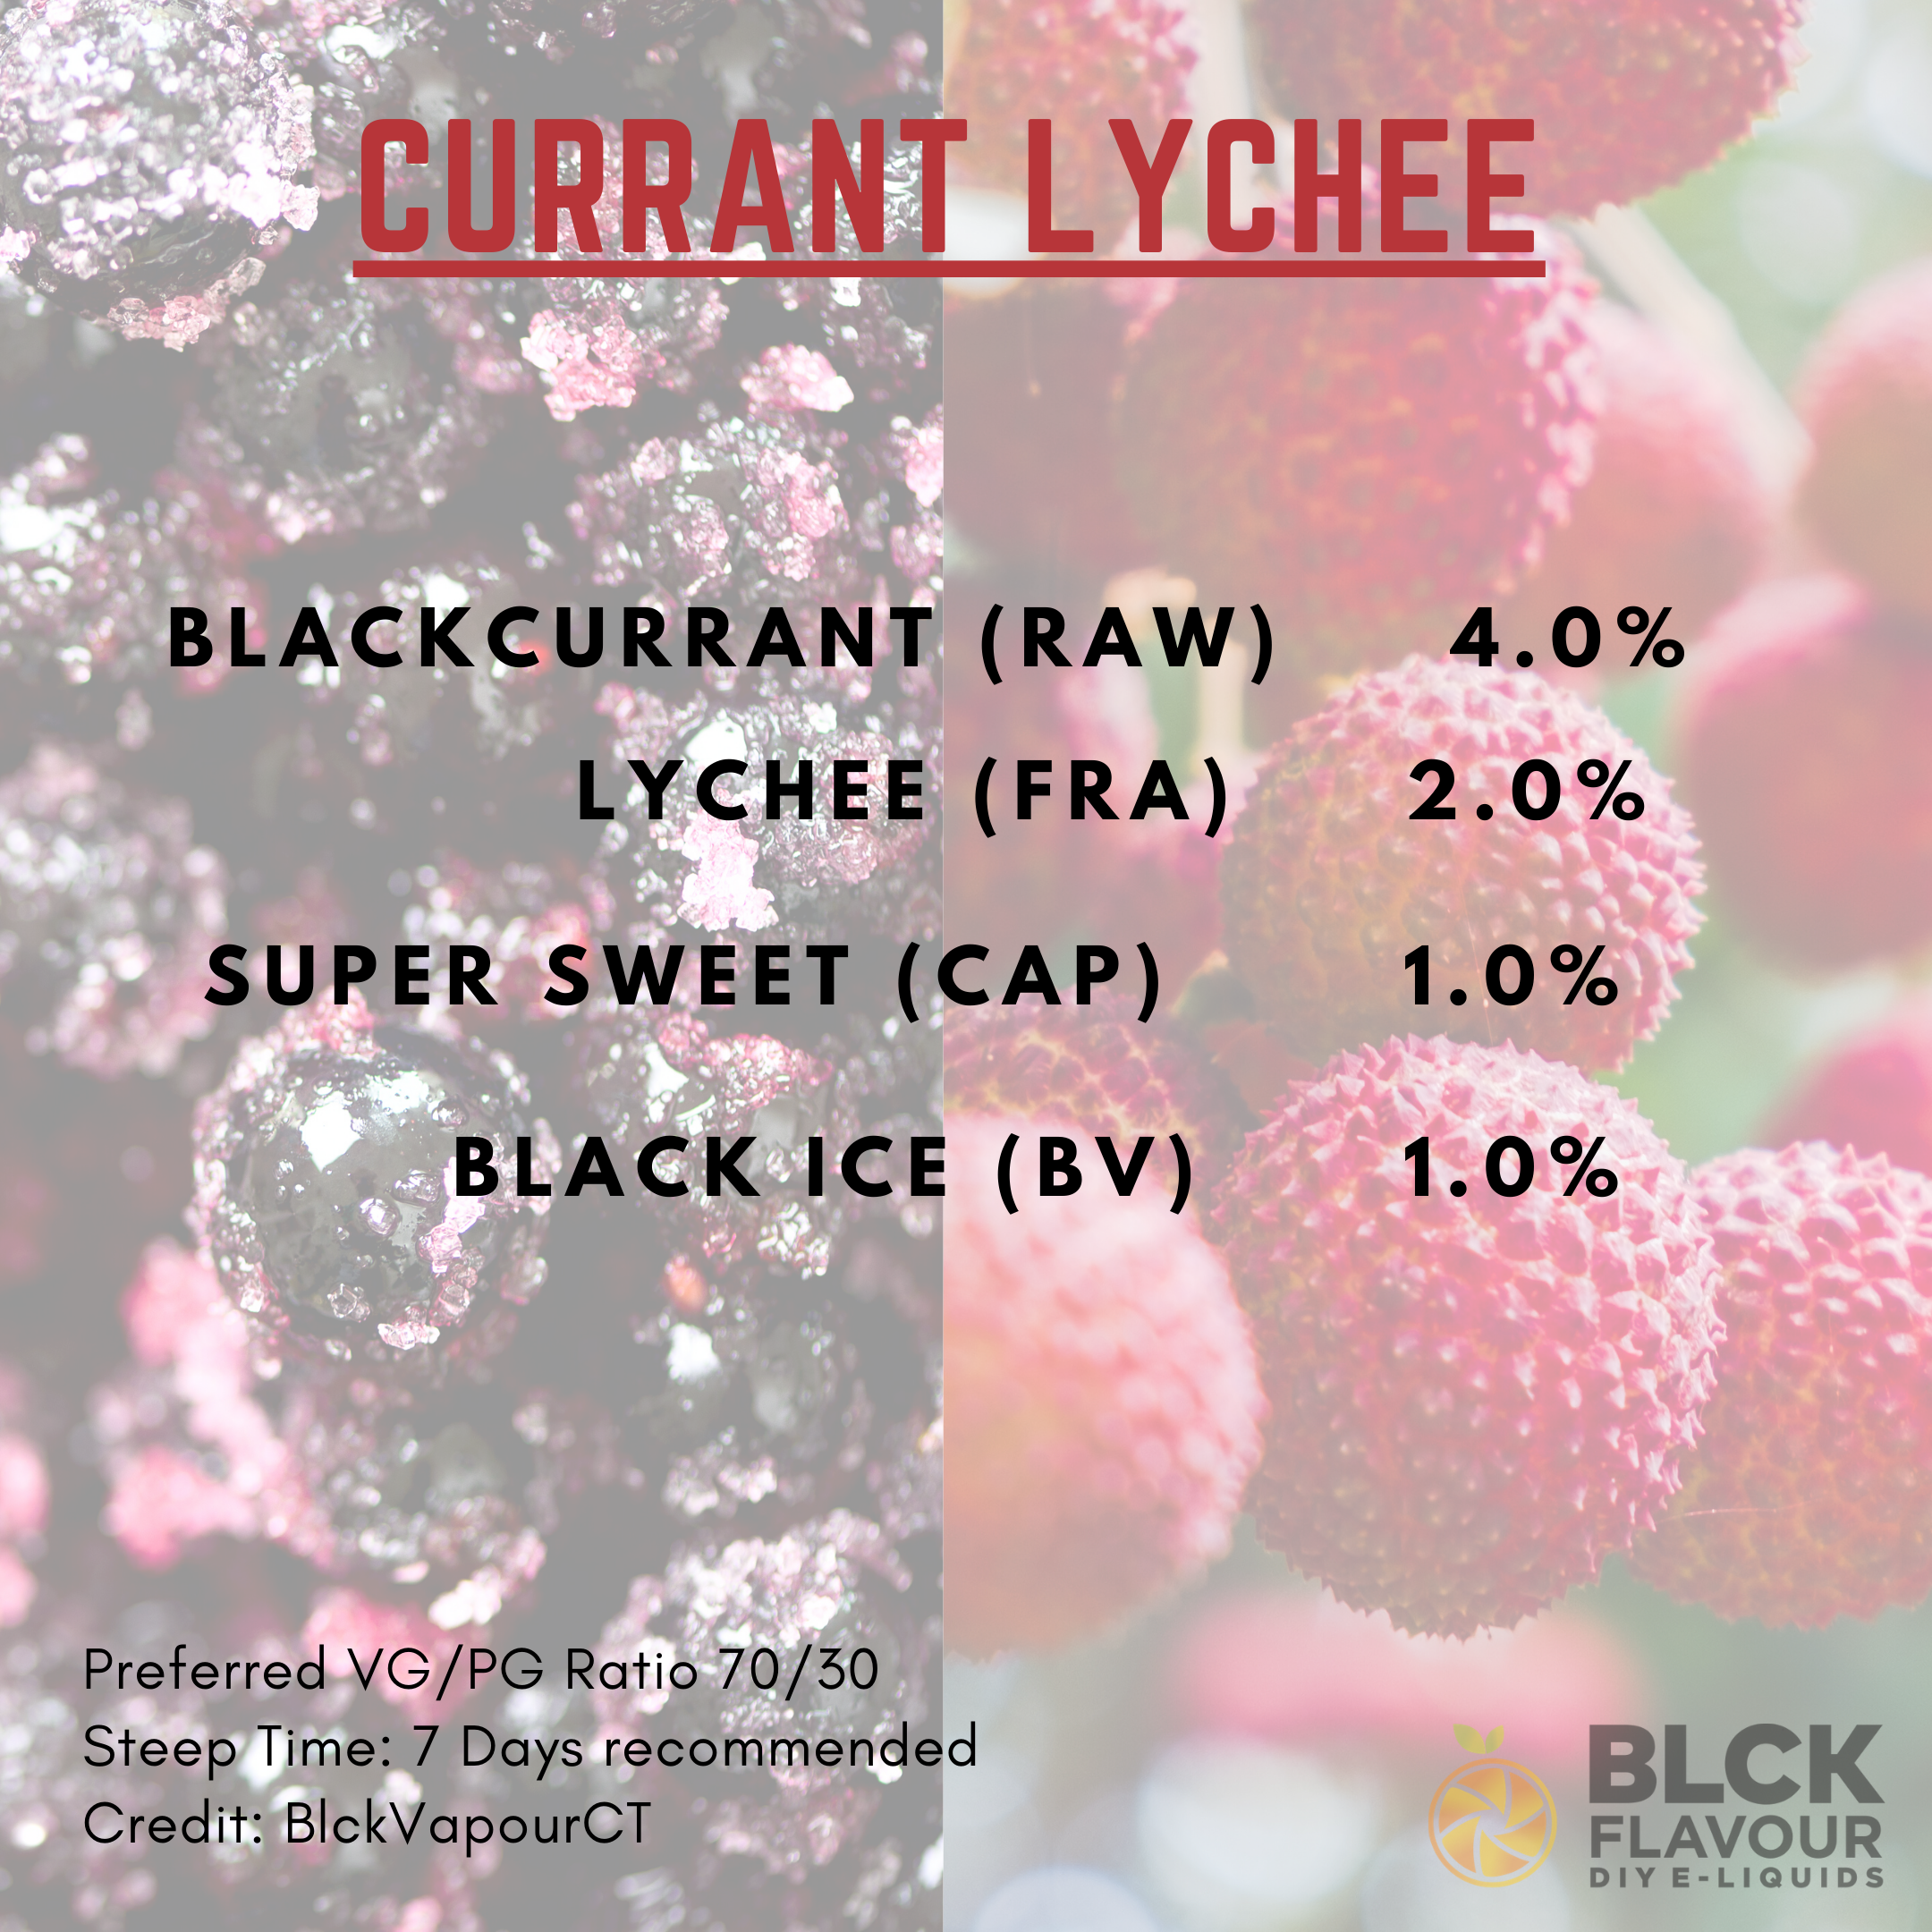 RB Currant Lychee Recipe Card